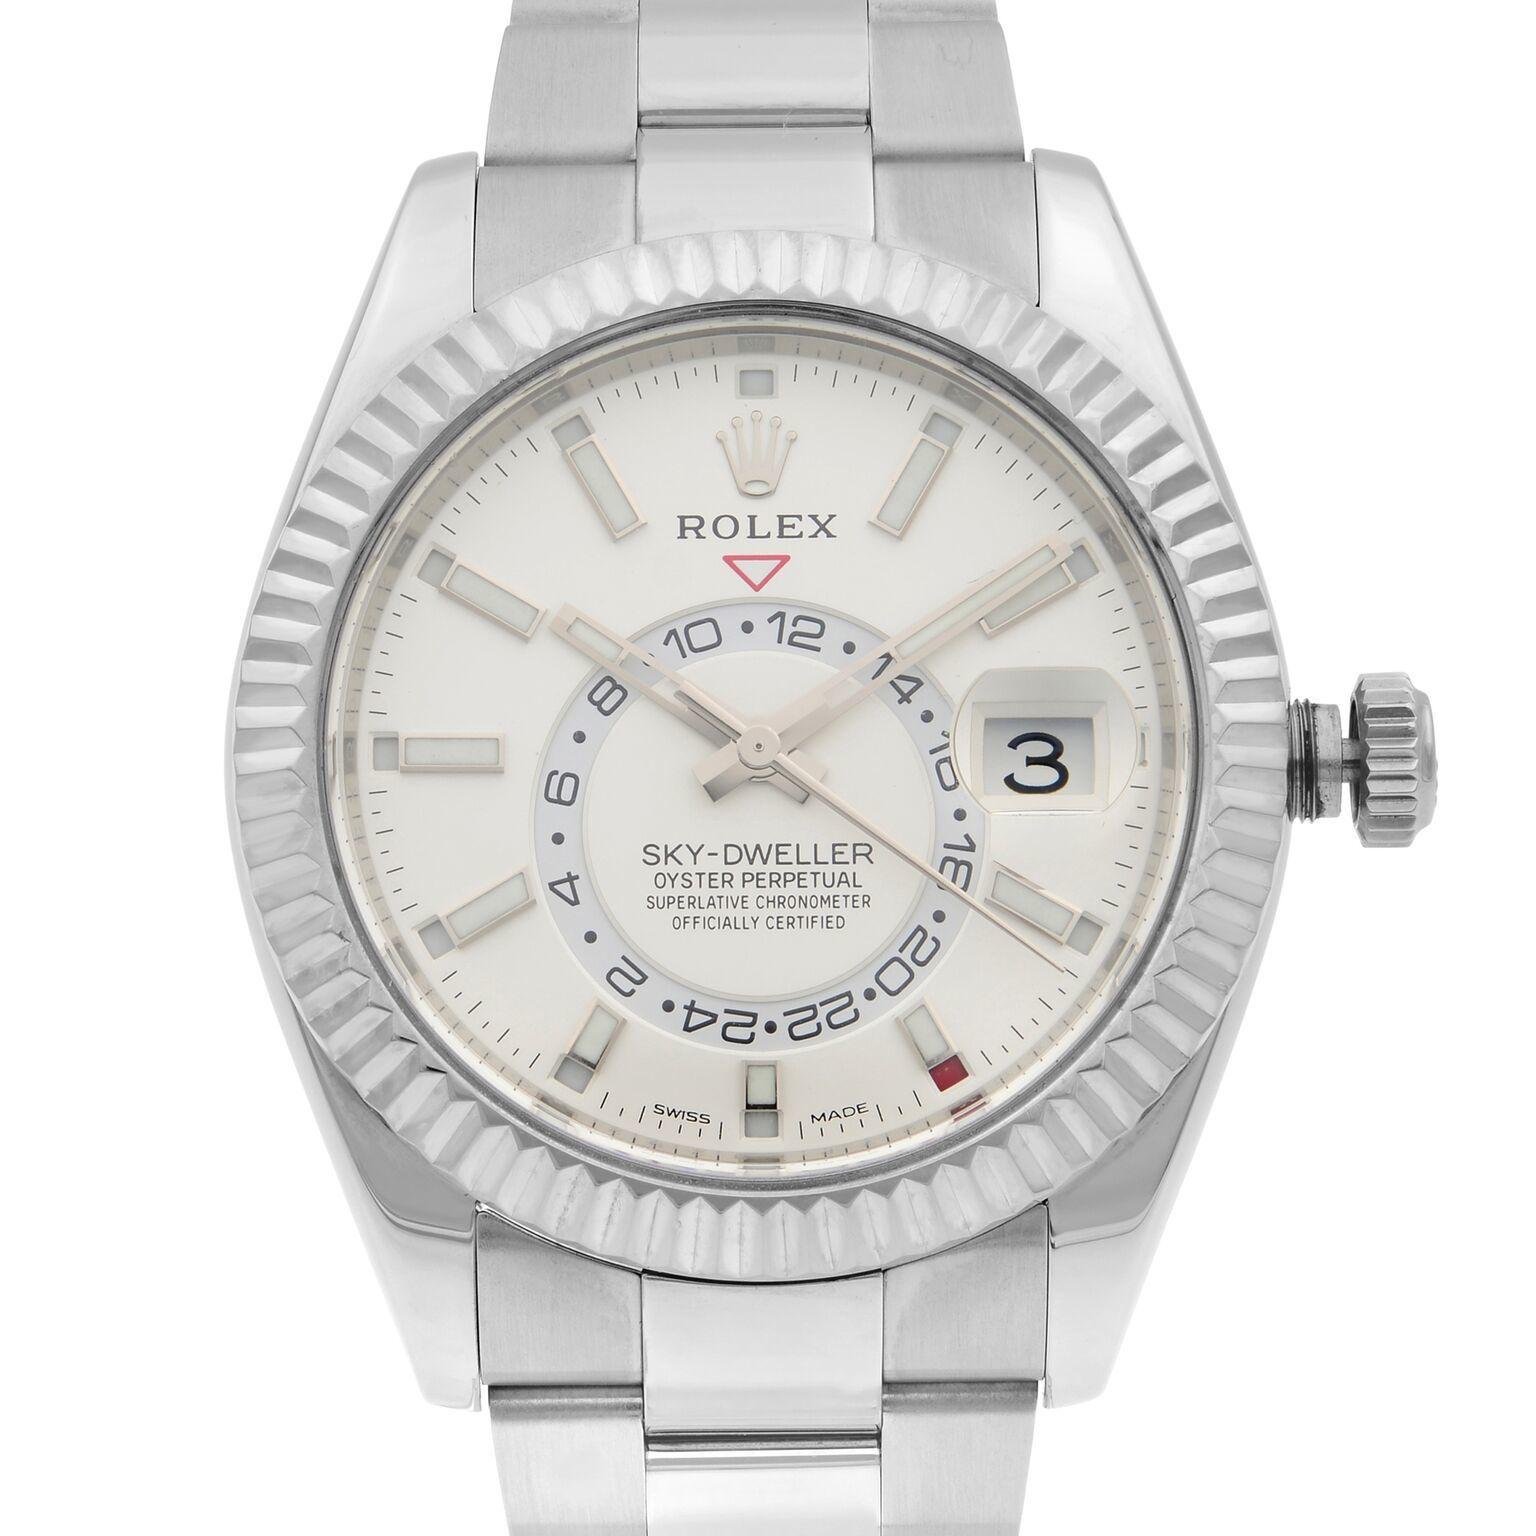 Pre-owned Rolex Sky-Dweller 42mm Stainless Steel White Dial Automatic Men's Oyster Watch 326934. This Beautiful Timepiece is Powered by Mechanical (Automatic) Movement and Features: Round Stainless Steel Case with Oyster Steel Bracelet, Fixed 18k